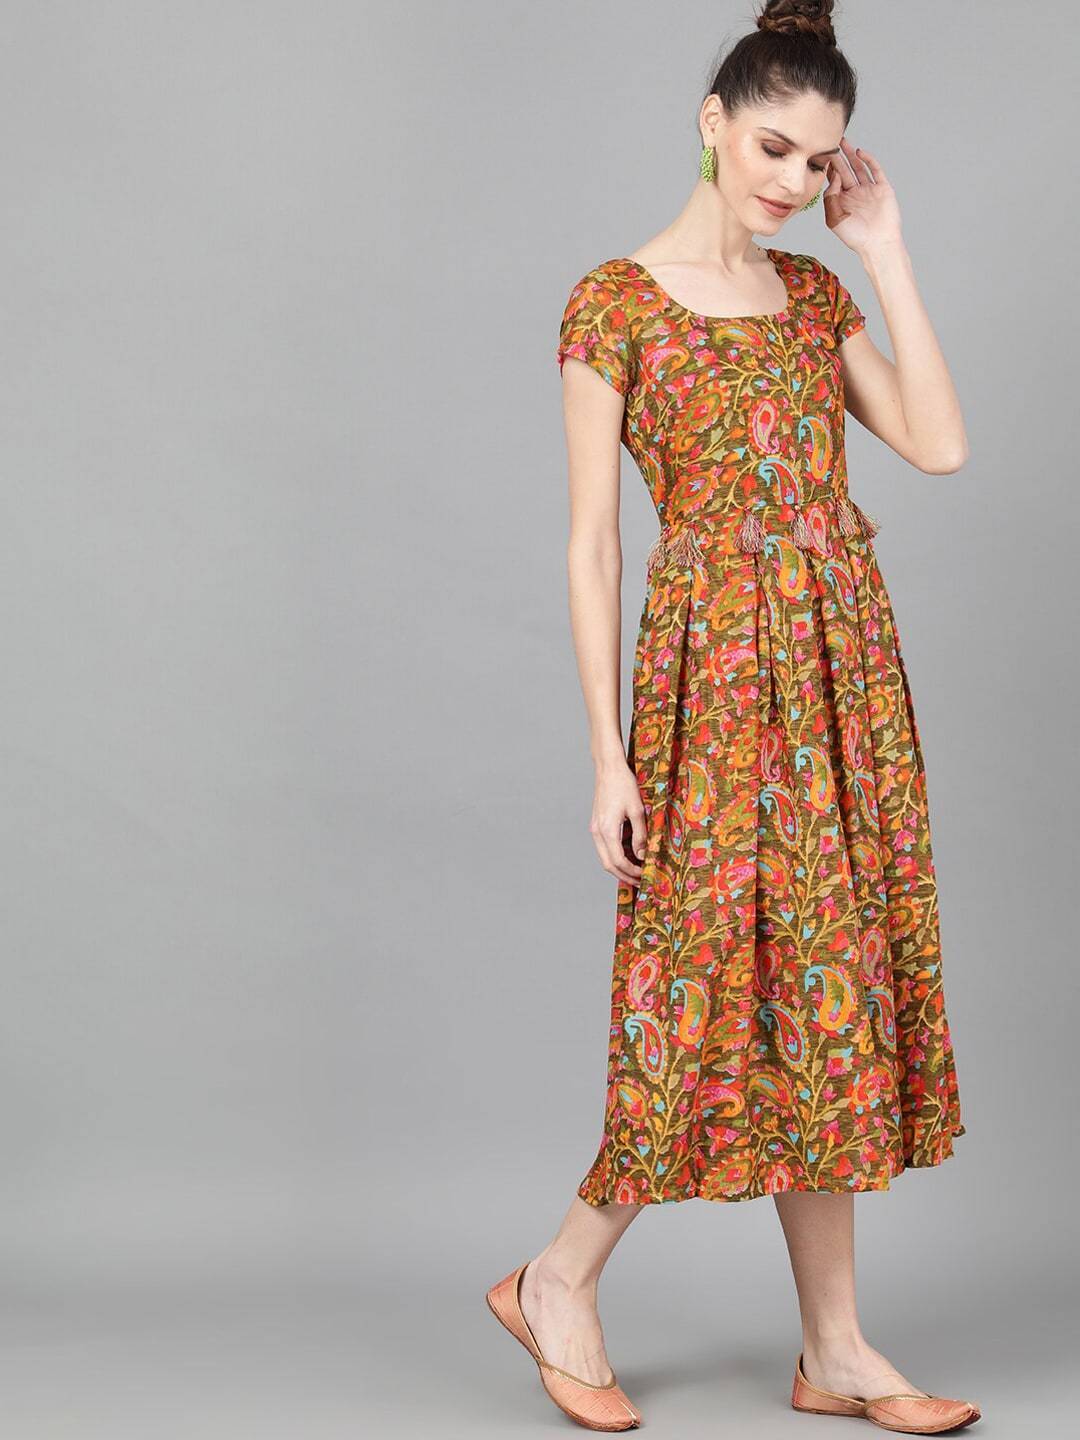 Women's  Olive Green & Orange Floral Printed Fit and Flare Dress - AKS